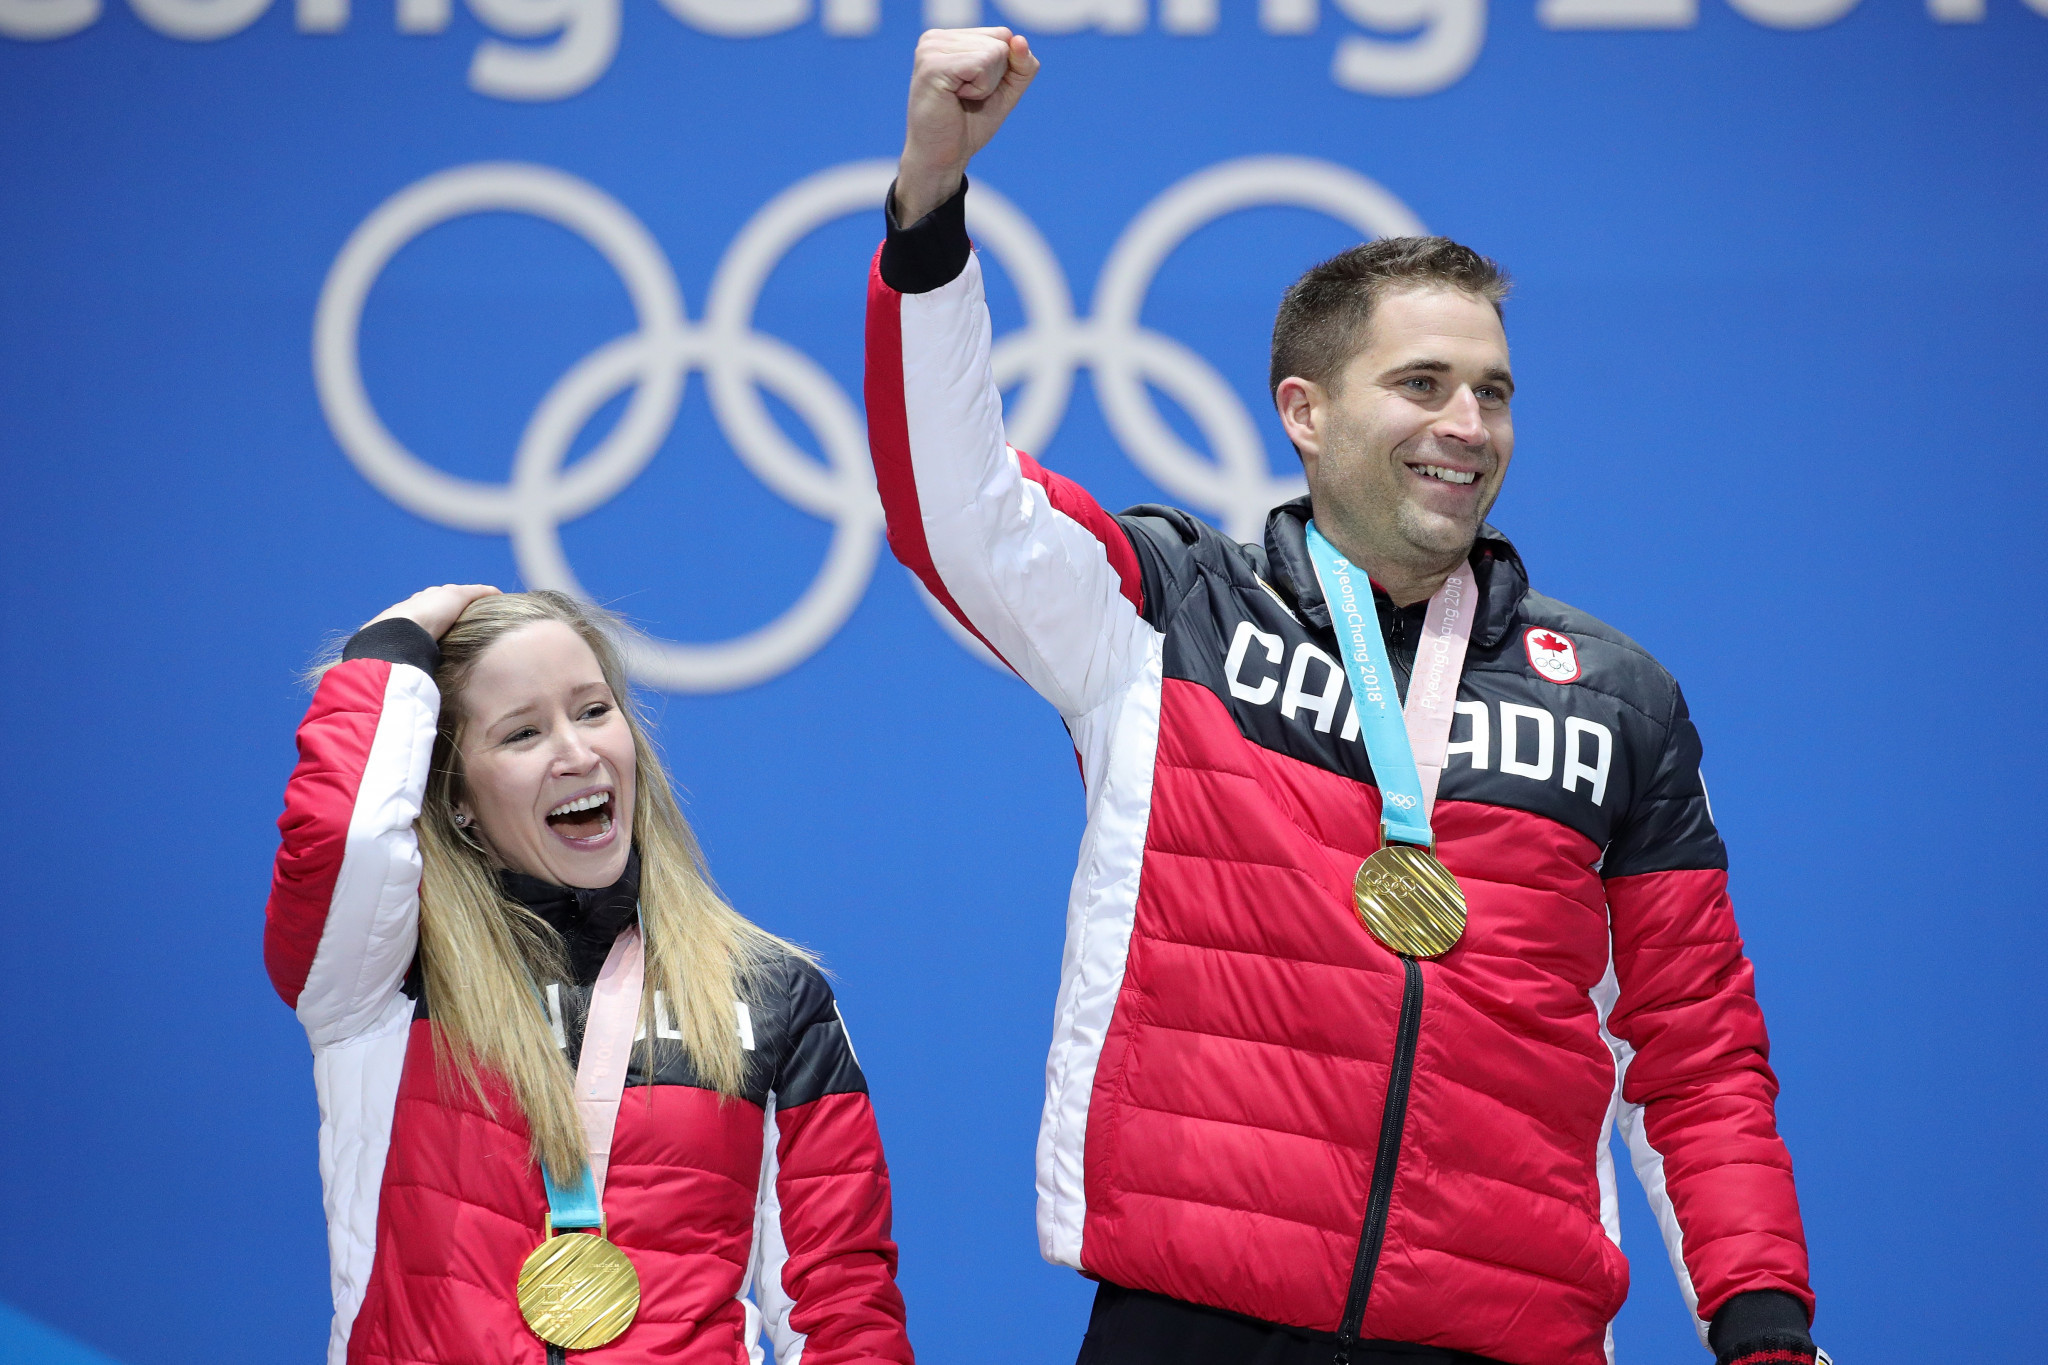 Curling Canada released its Beijing 2022 qualification criteria for teams and mixed doubles, having won the Olympic gold medal in the latter event at Pyeongchang 2018 ©Getty Images